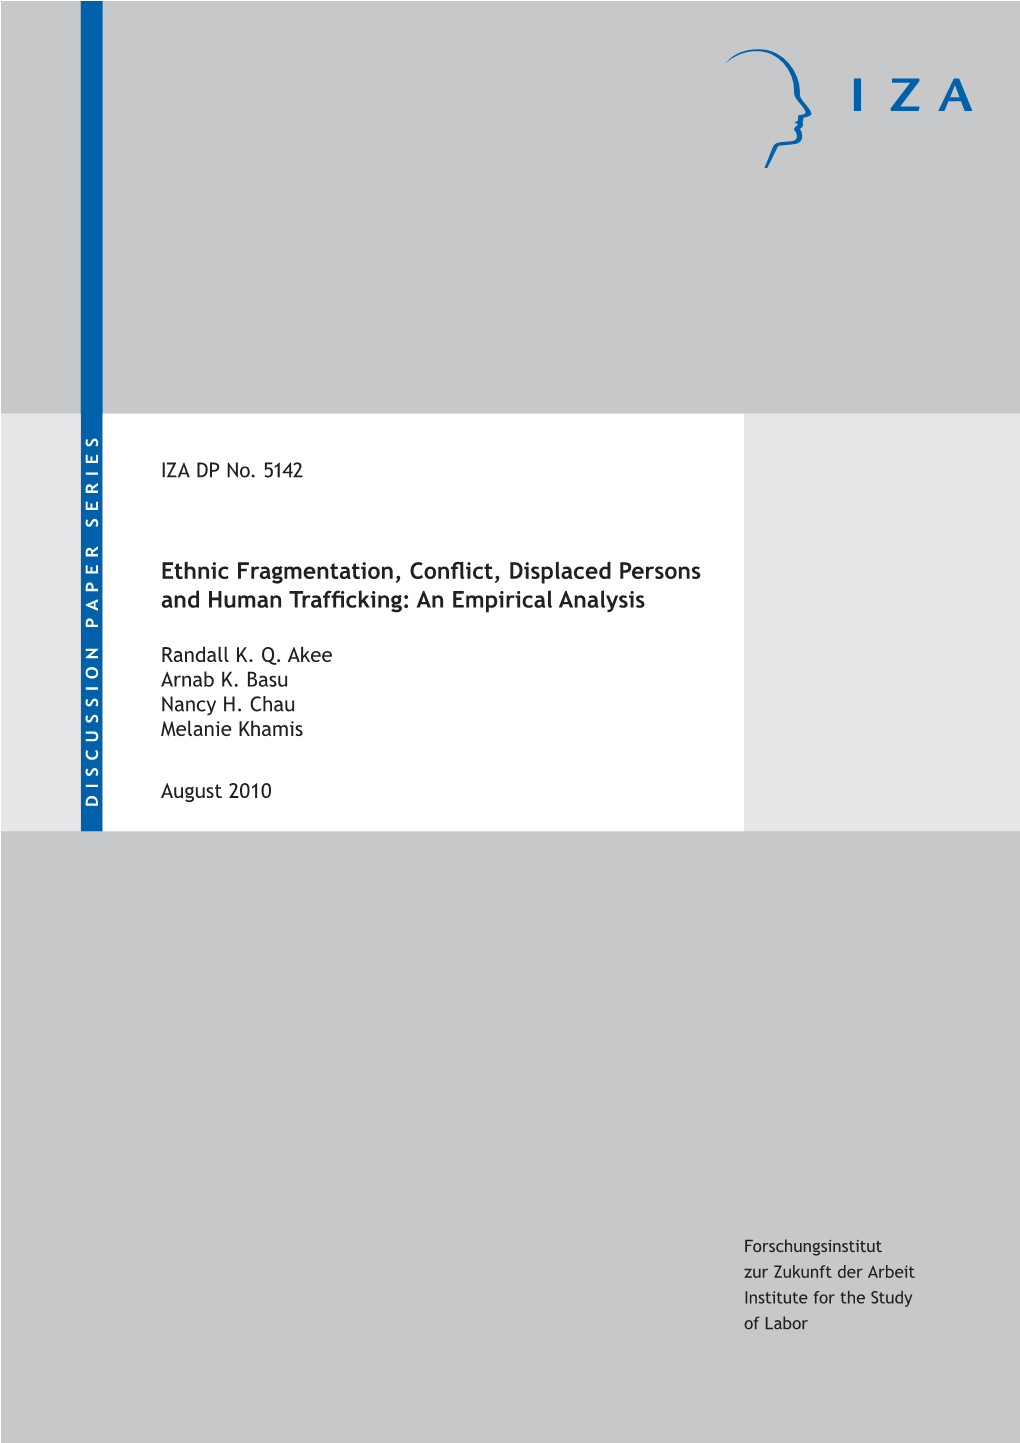 Ethnic Fragmentation, Conflict, Displaced Persons and Human Trafficking: an Empirical Analysis